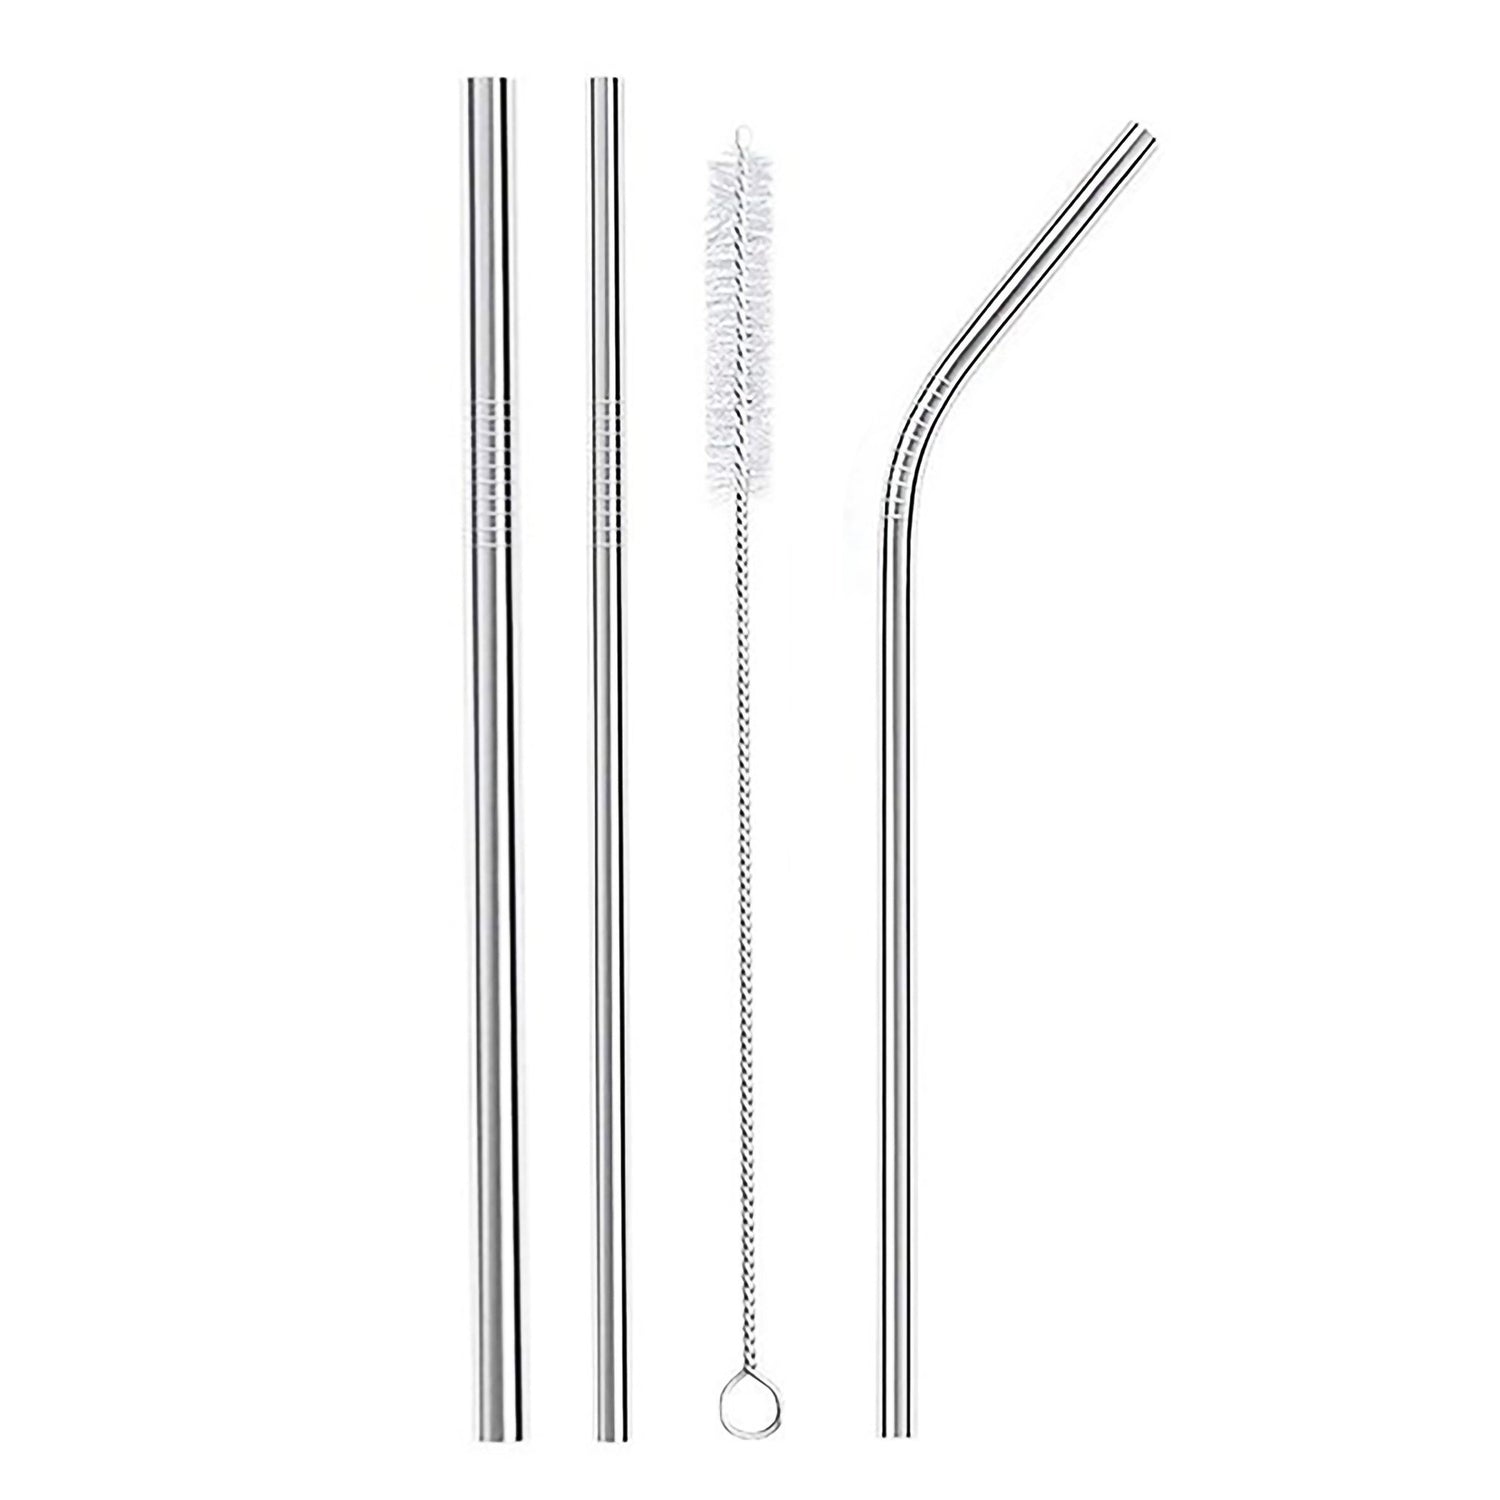  Stainless Steel Re-Usable Straws. Plant fiber brush, Vegan friendly   Plastic-free  304-grade stainless steel, a great alternative to plastics . Eat Healthy, Live Healthy!